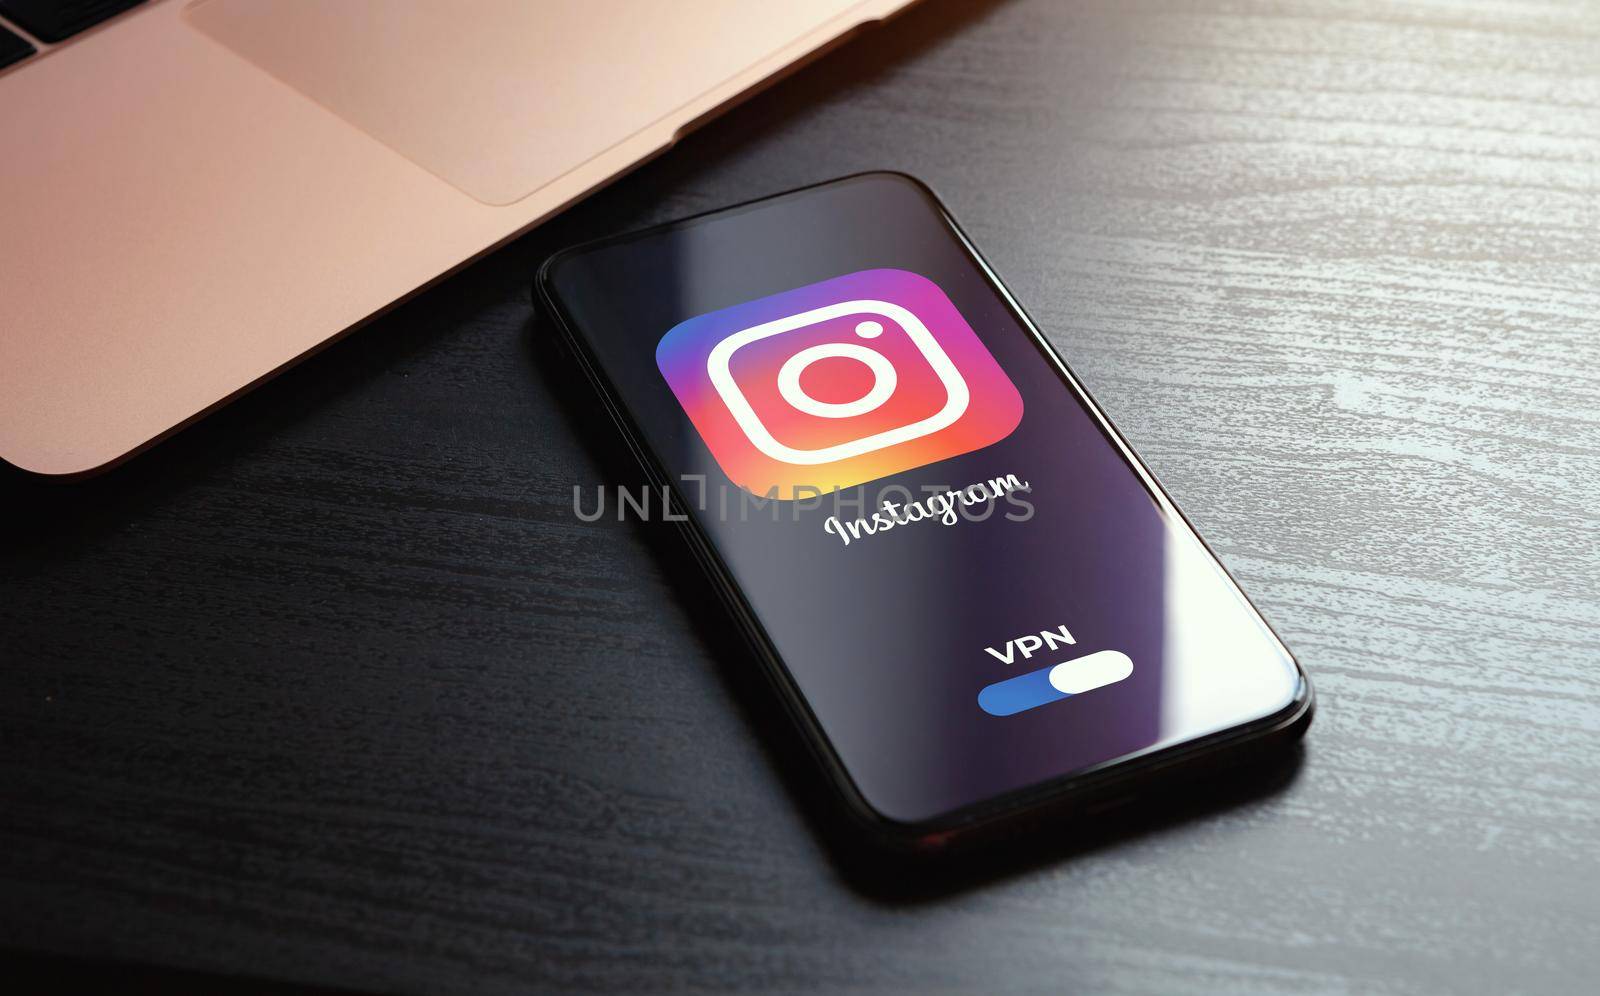 MOSCOW, RUSSIA - MAY 03, 2022: iphone lying on a wooden table, on the screen Instagram social application logo, which starts only after turning on the vpn connection. Government censorship concept.